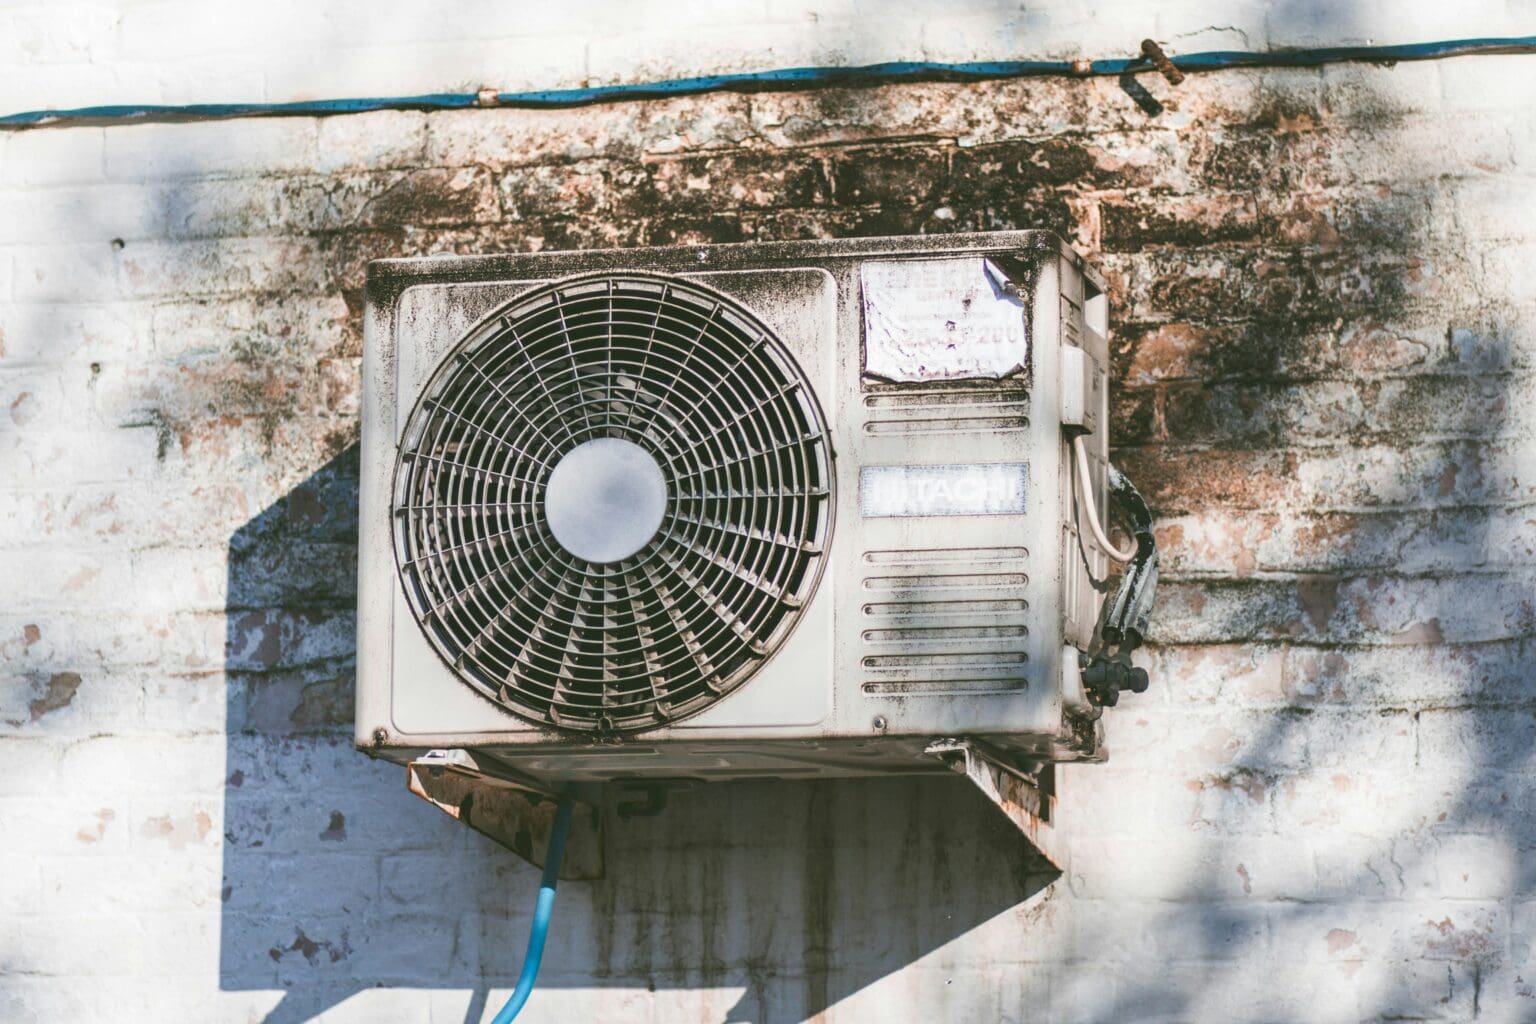 An old air conditioning unit mounted on a weathered wall with visible stains and peeling paint.